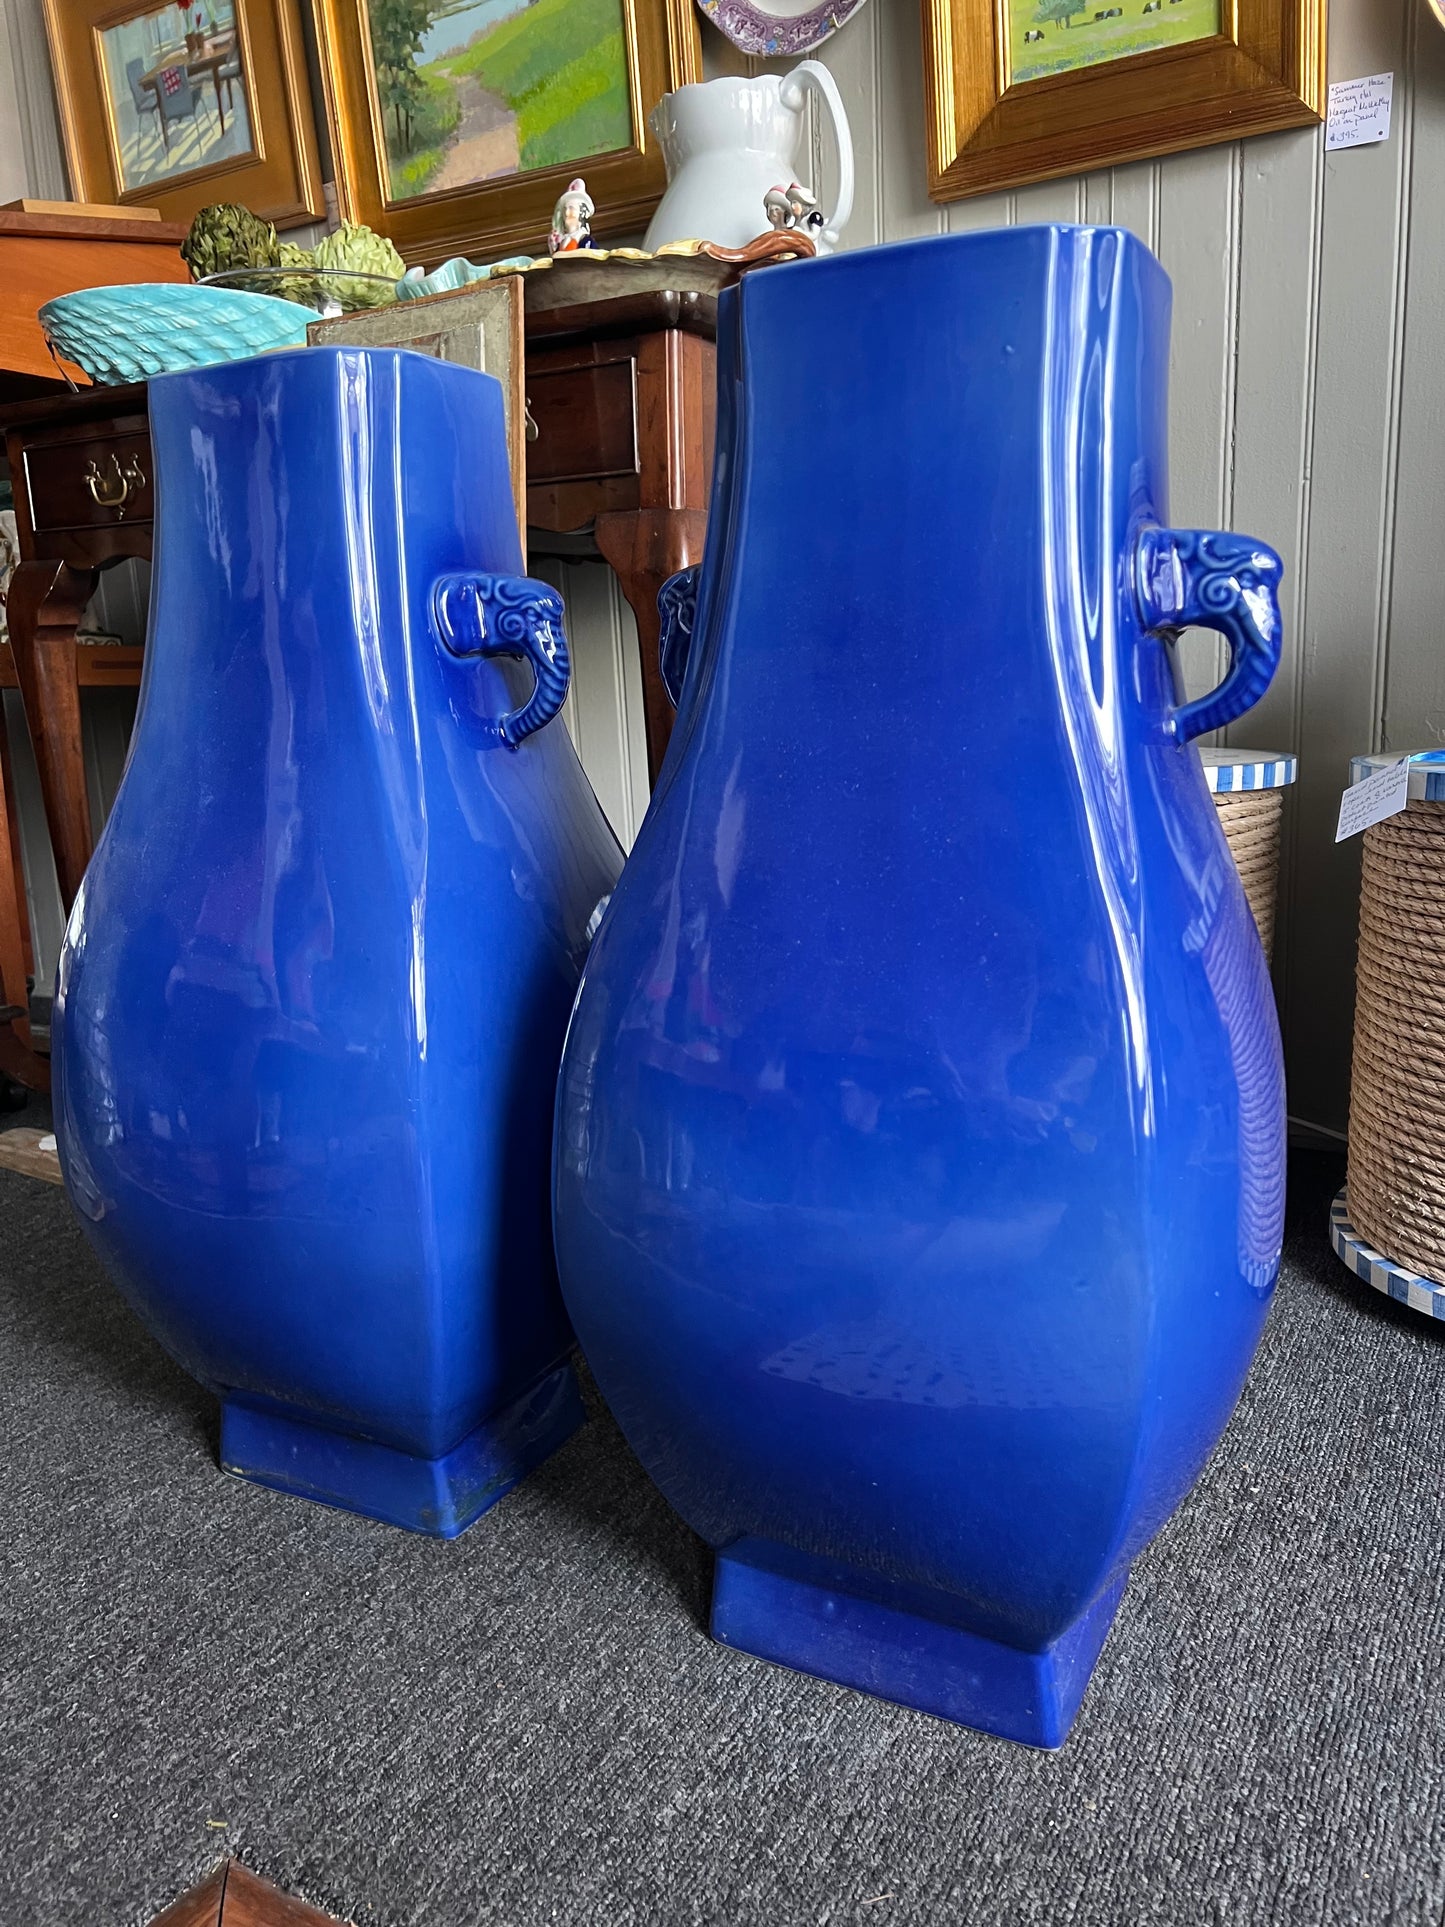 Large Chinese Palace Vases/Umbrella Stands